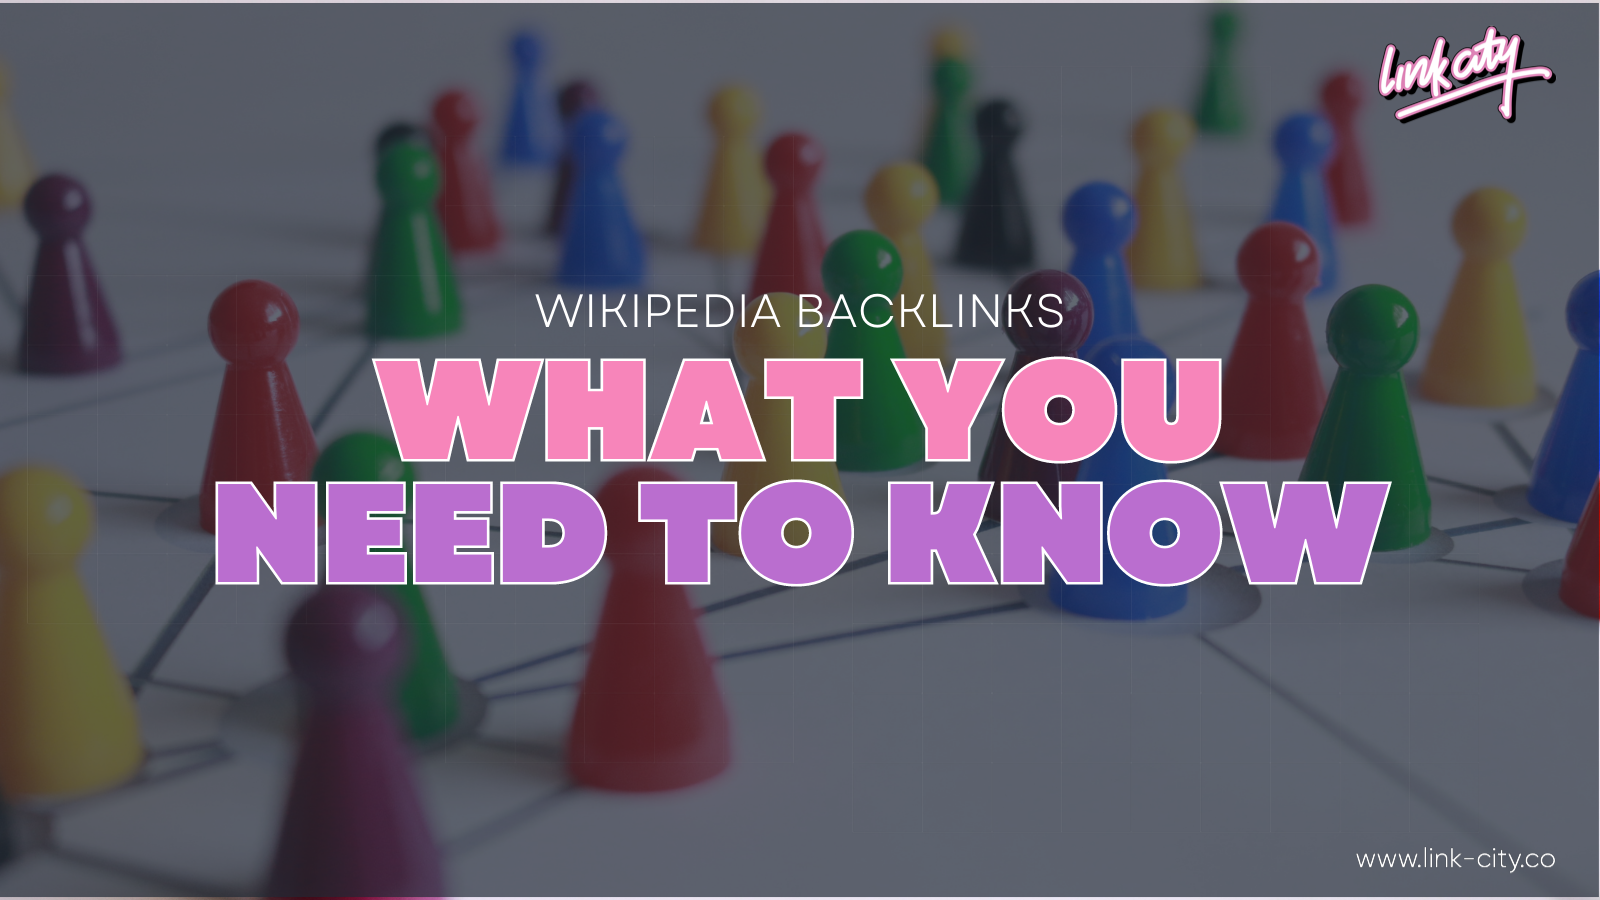 Wikipedia Backlinks - What You Need To Know